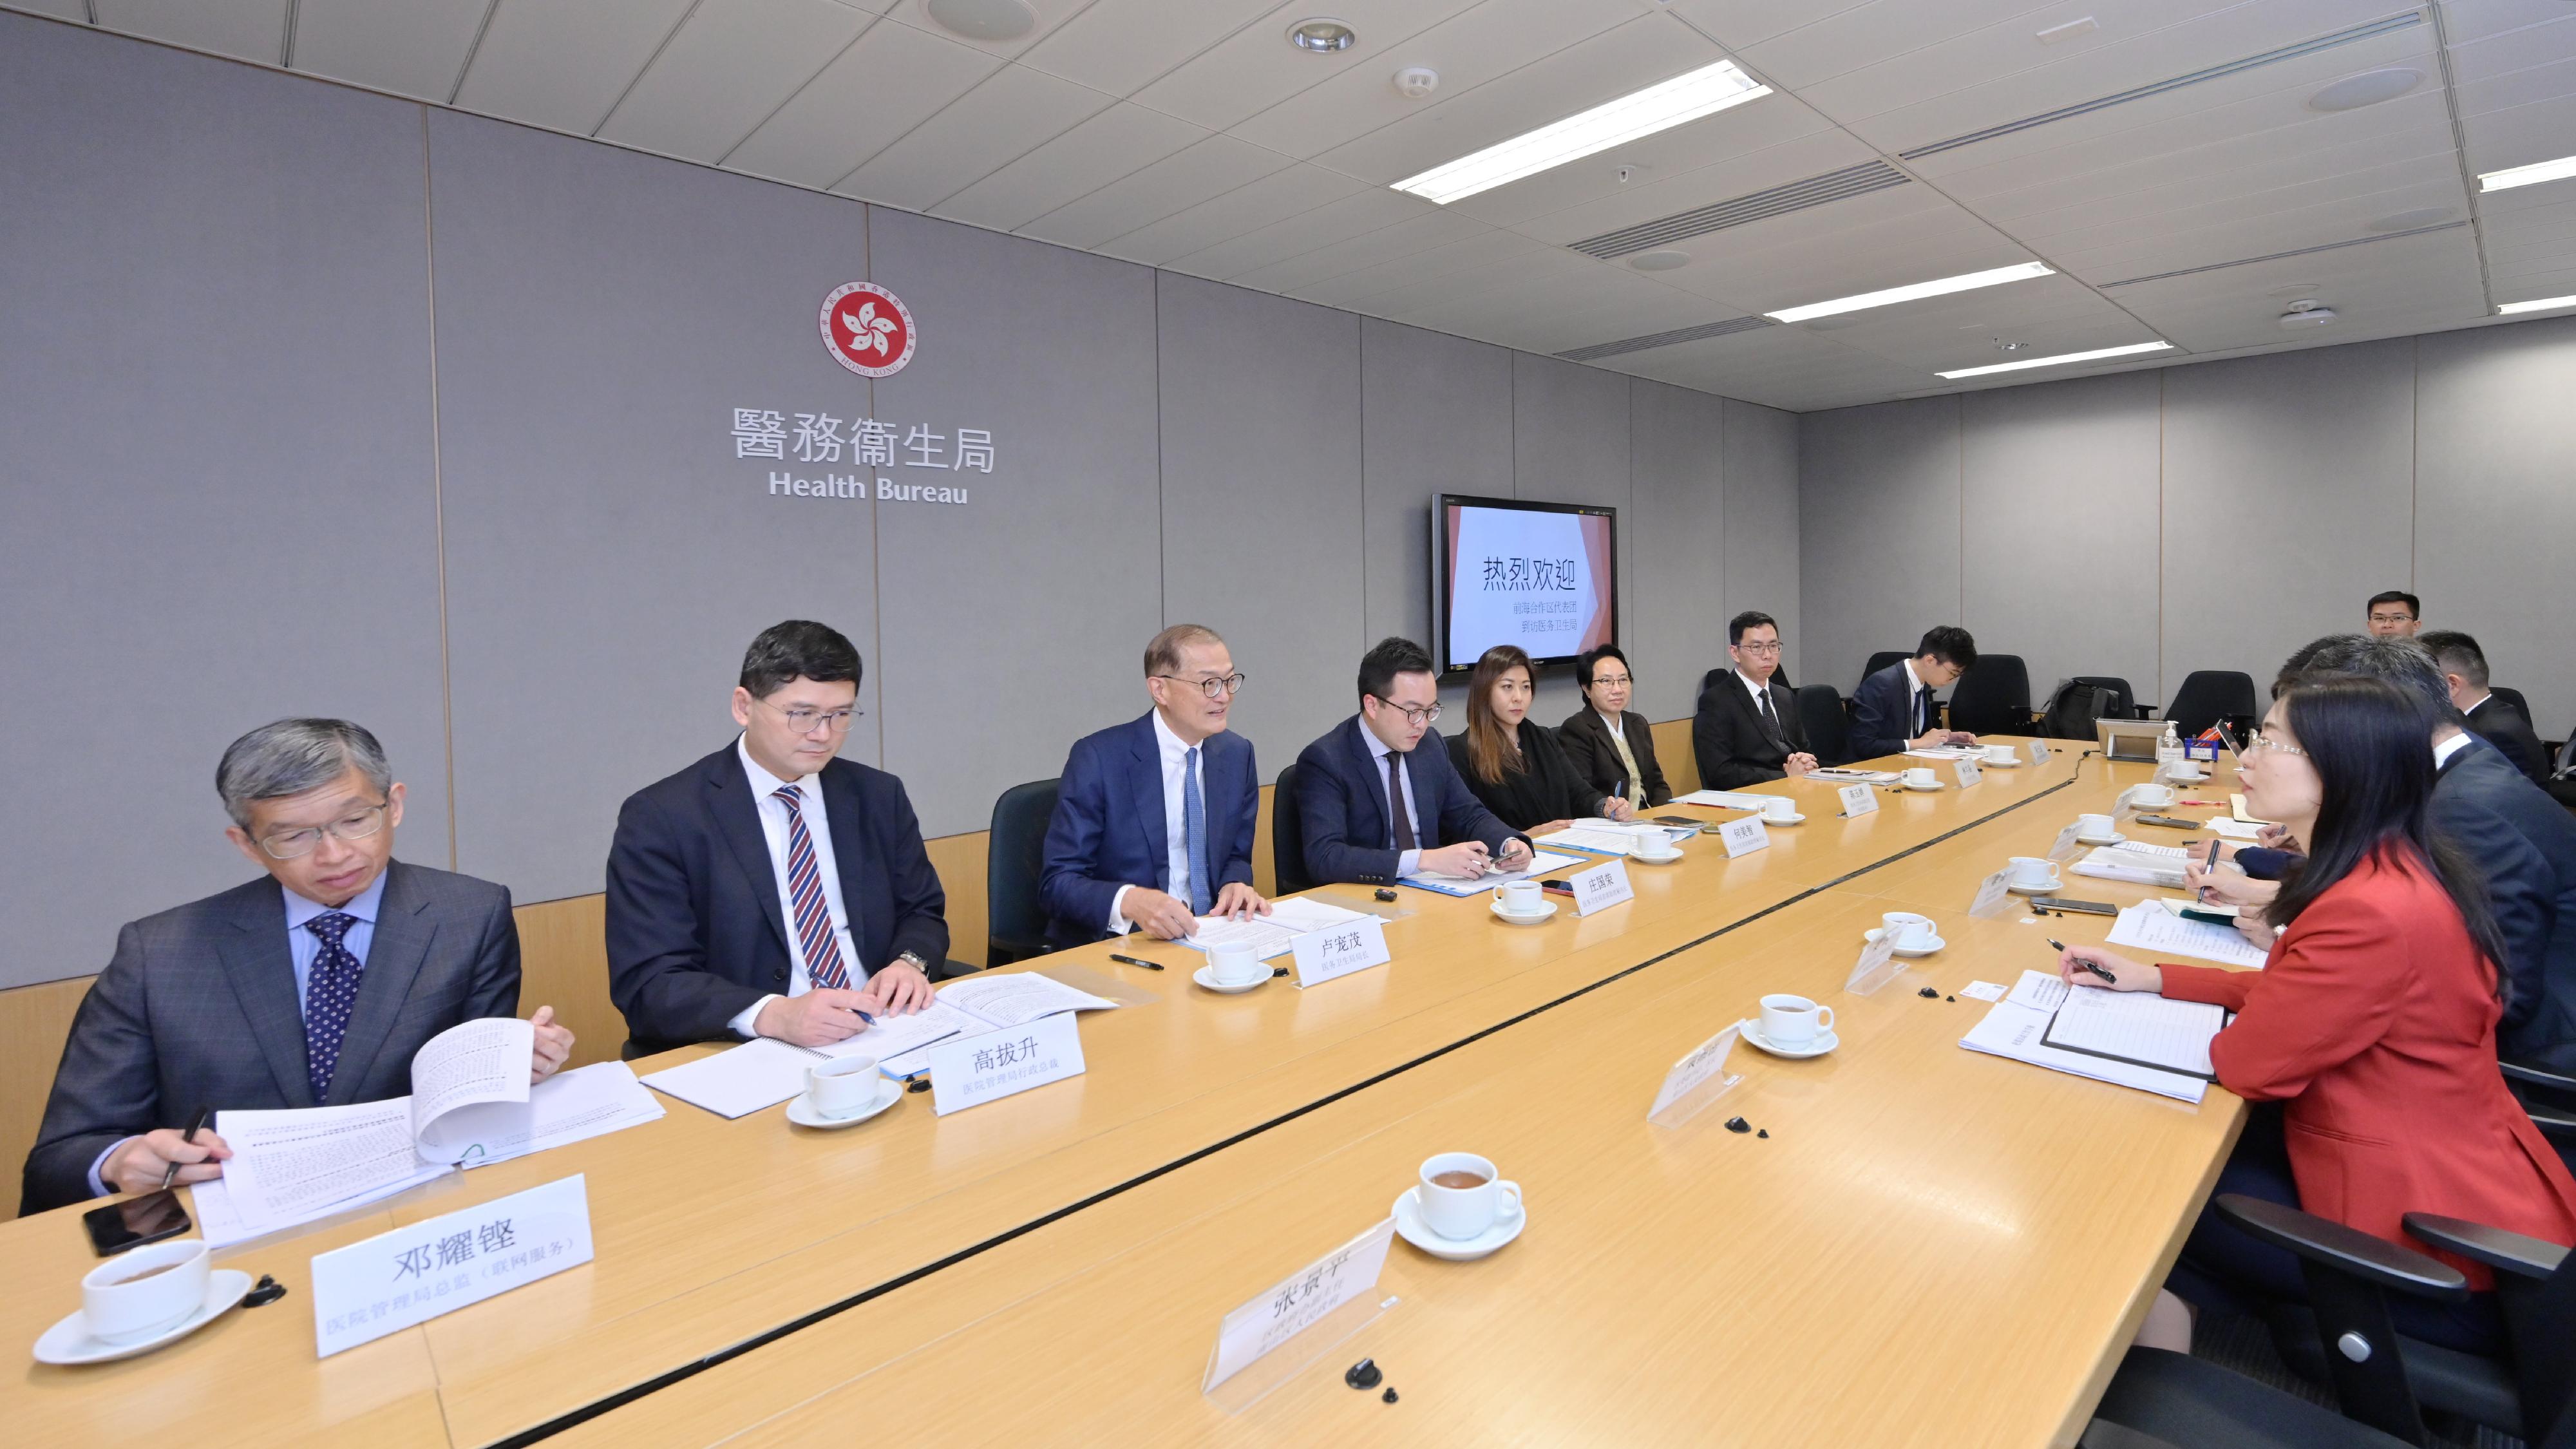 The Secretary for Health, Professor Lo Chung-mau (third left), met with the Qianhai Authority and Nanshan District People's Government delegation today (March 2) to exchange views on the development of healthcare services and healthcare innovation industry. The Chief Executive of the Hospital Authority, Dr Tony Ko (second left), also attended the meeting.